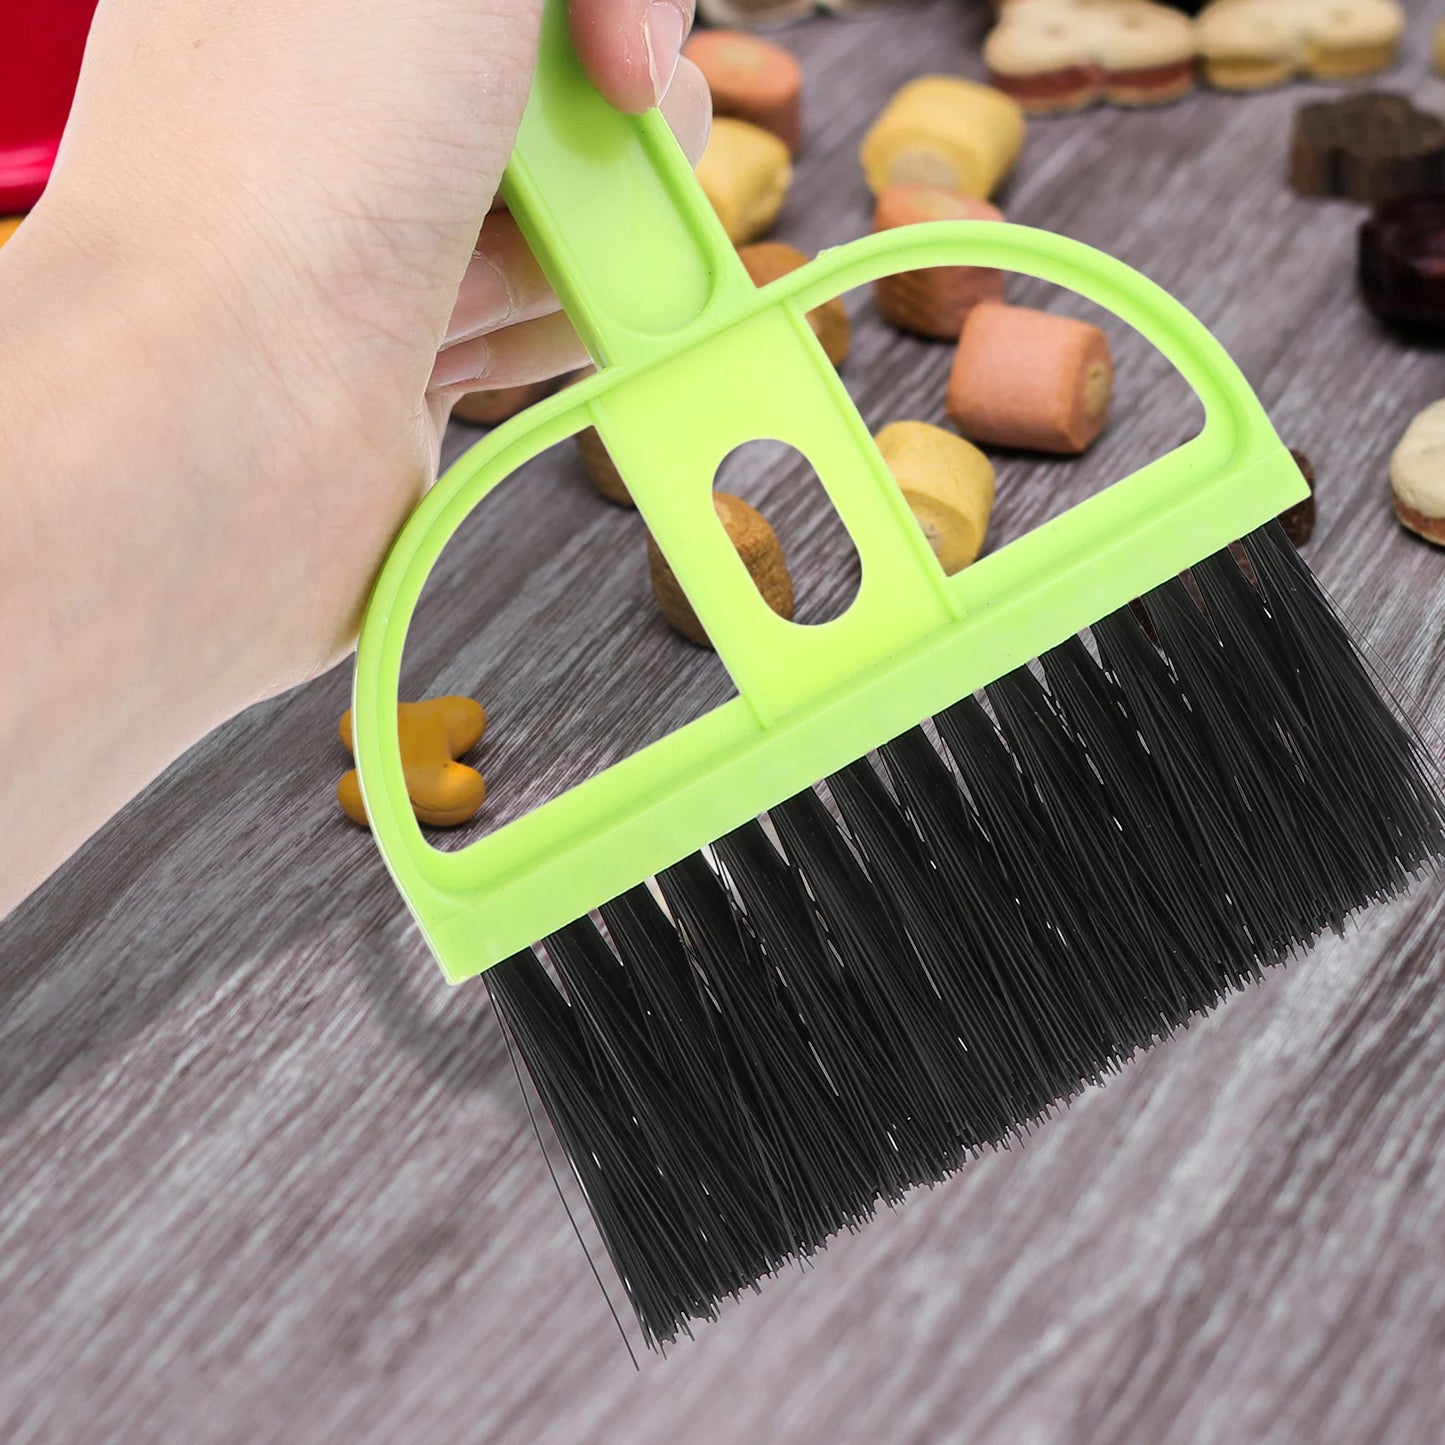 Mini Dustpan and Brush Set: A Must-Have for Small Pet Owners